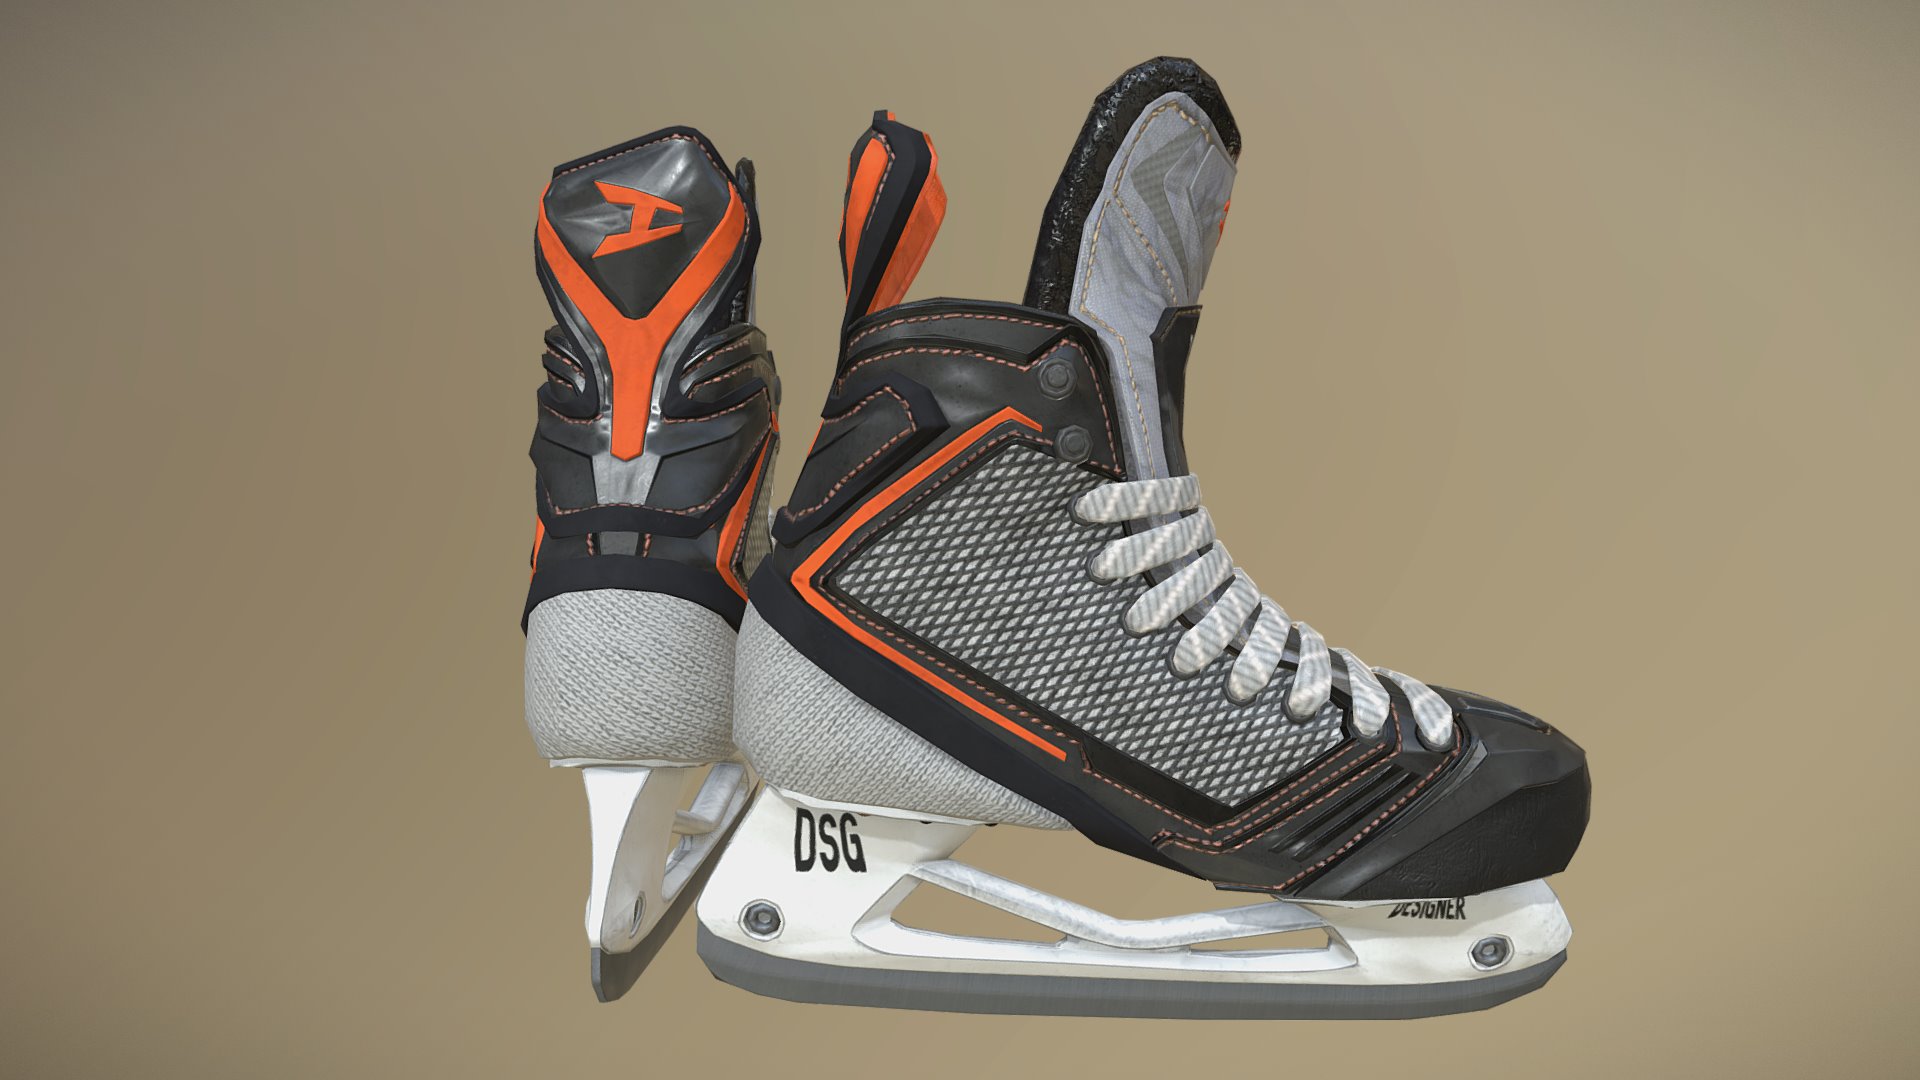 Half hand-painted, and highly detailed, this model is now available on Marketplaces.

Please leave a Like or a Comment if you like the model to help me bring you better products.

Thank you! - Ice Skate - 3D model by Lokomotto (@THEOJANG) 3d model